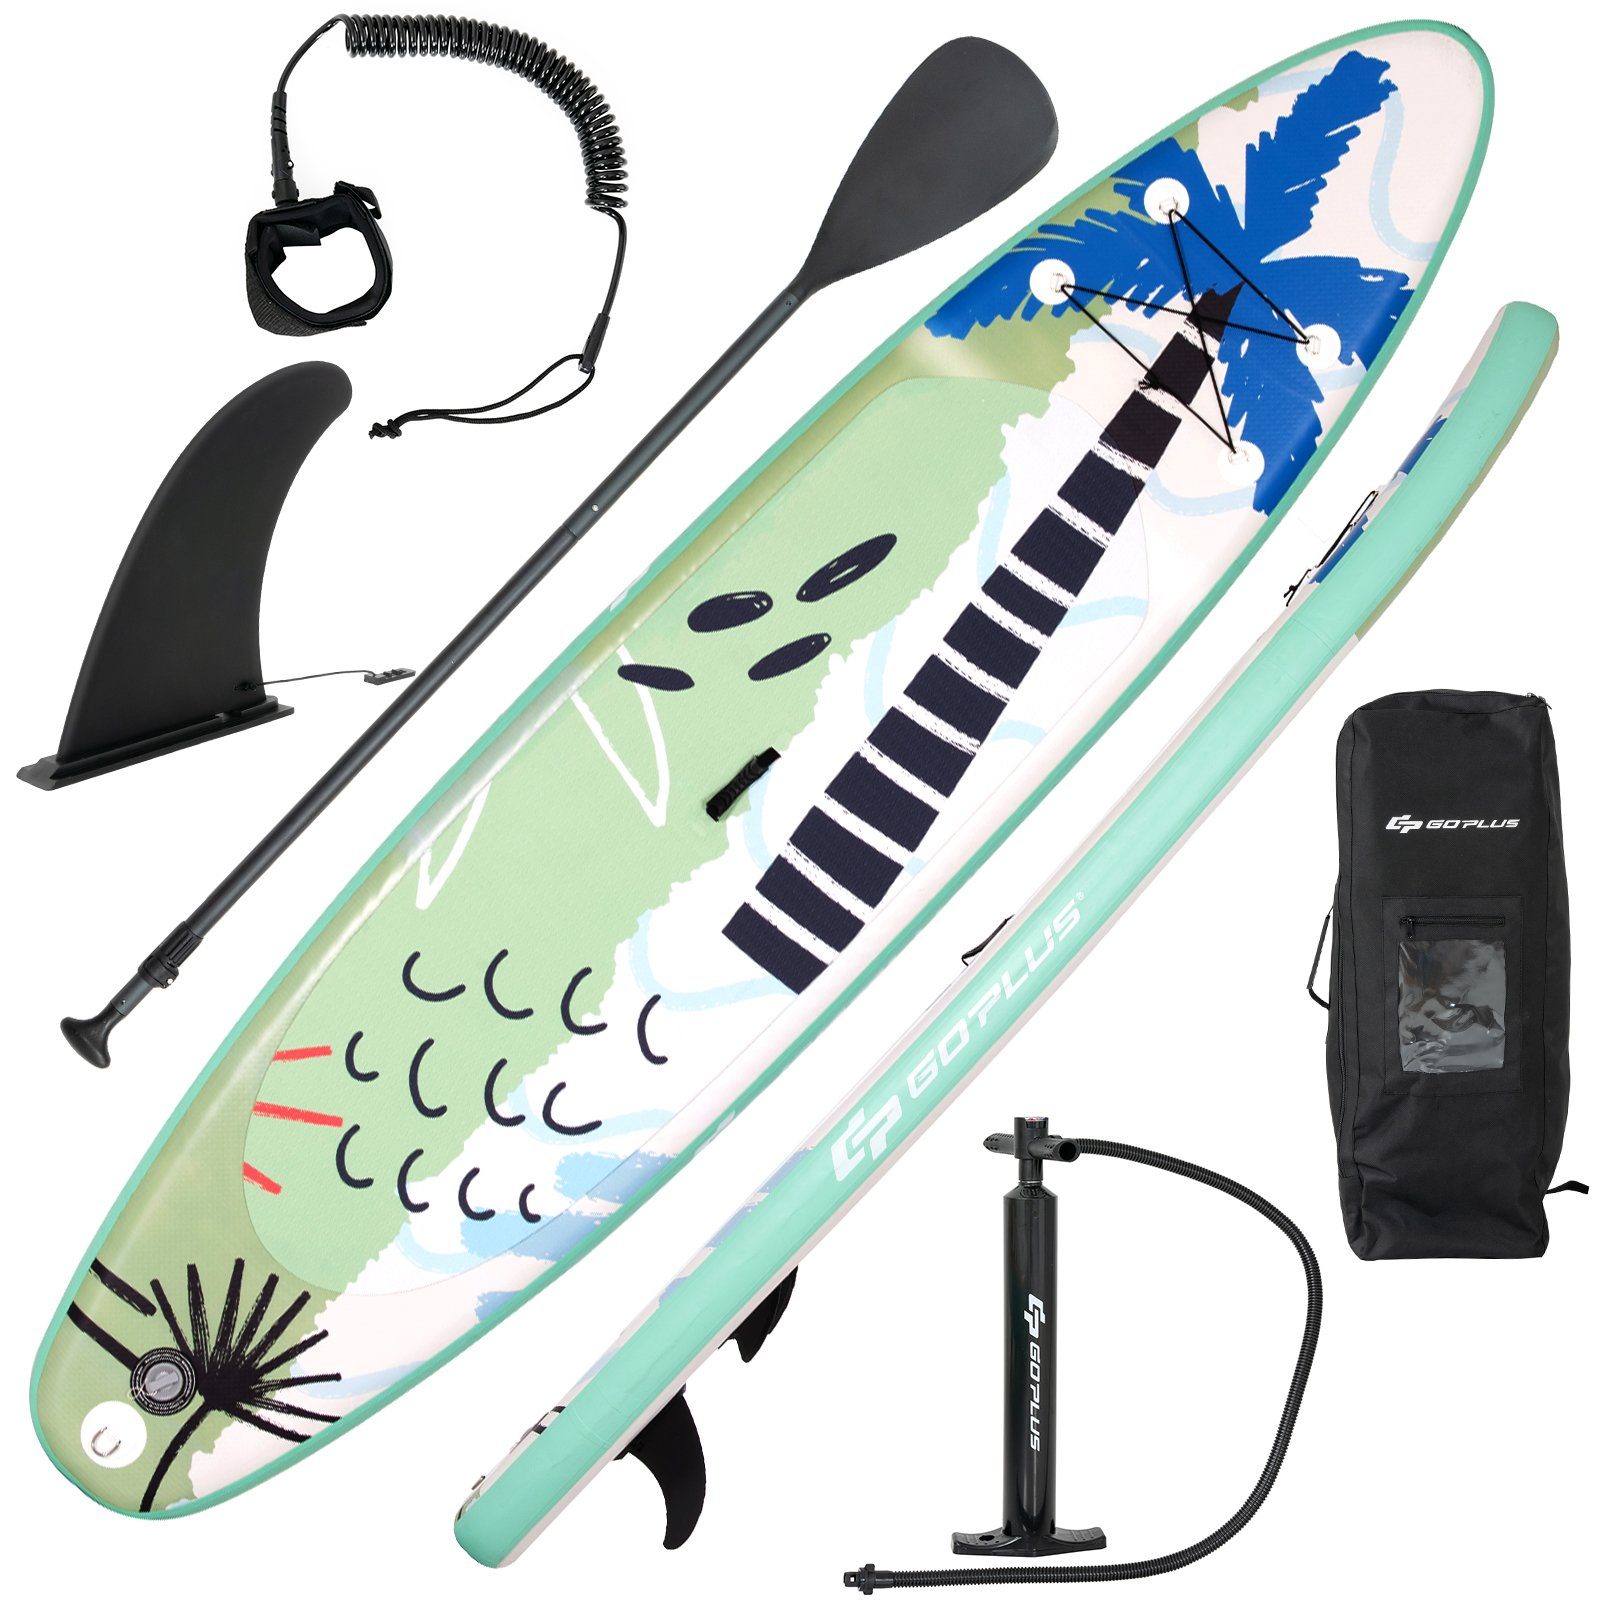 COSTWAY SUP-Board Stand Up Paddling Board, mit Paddel & Pumpe